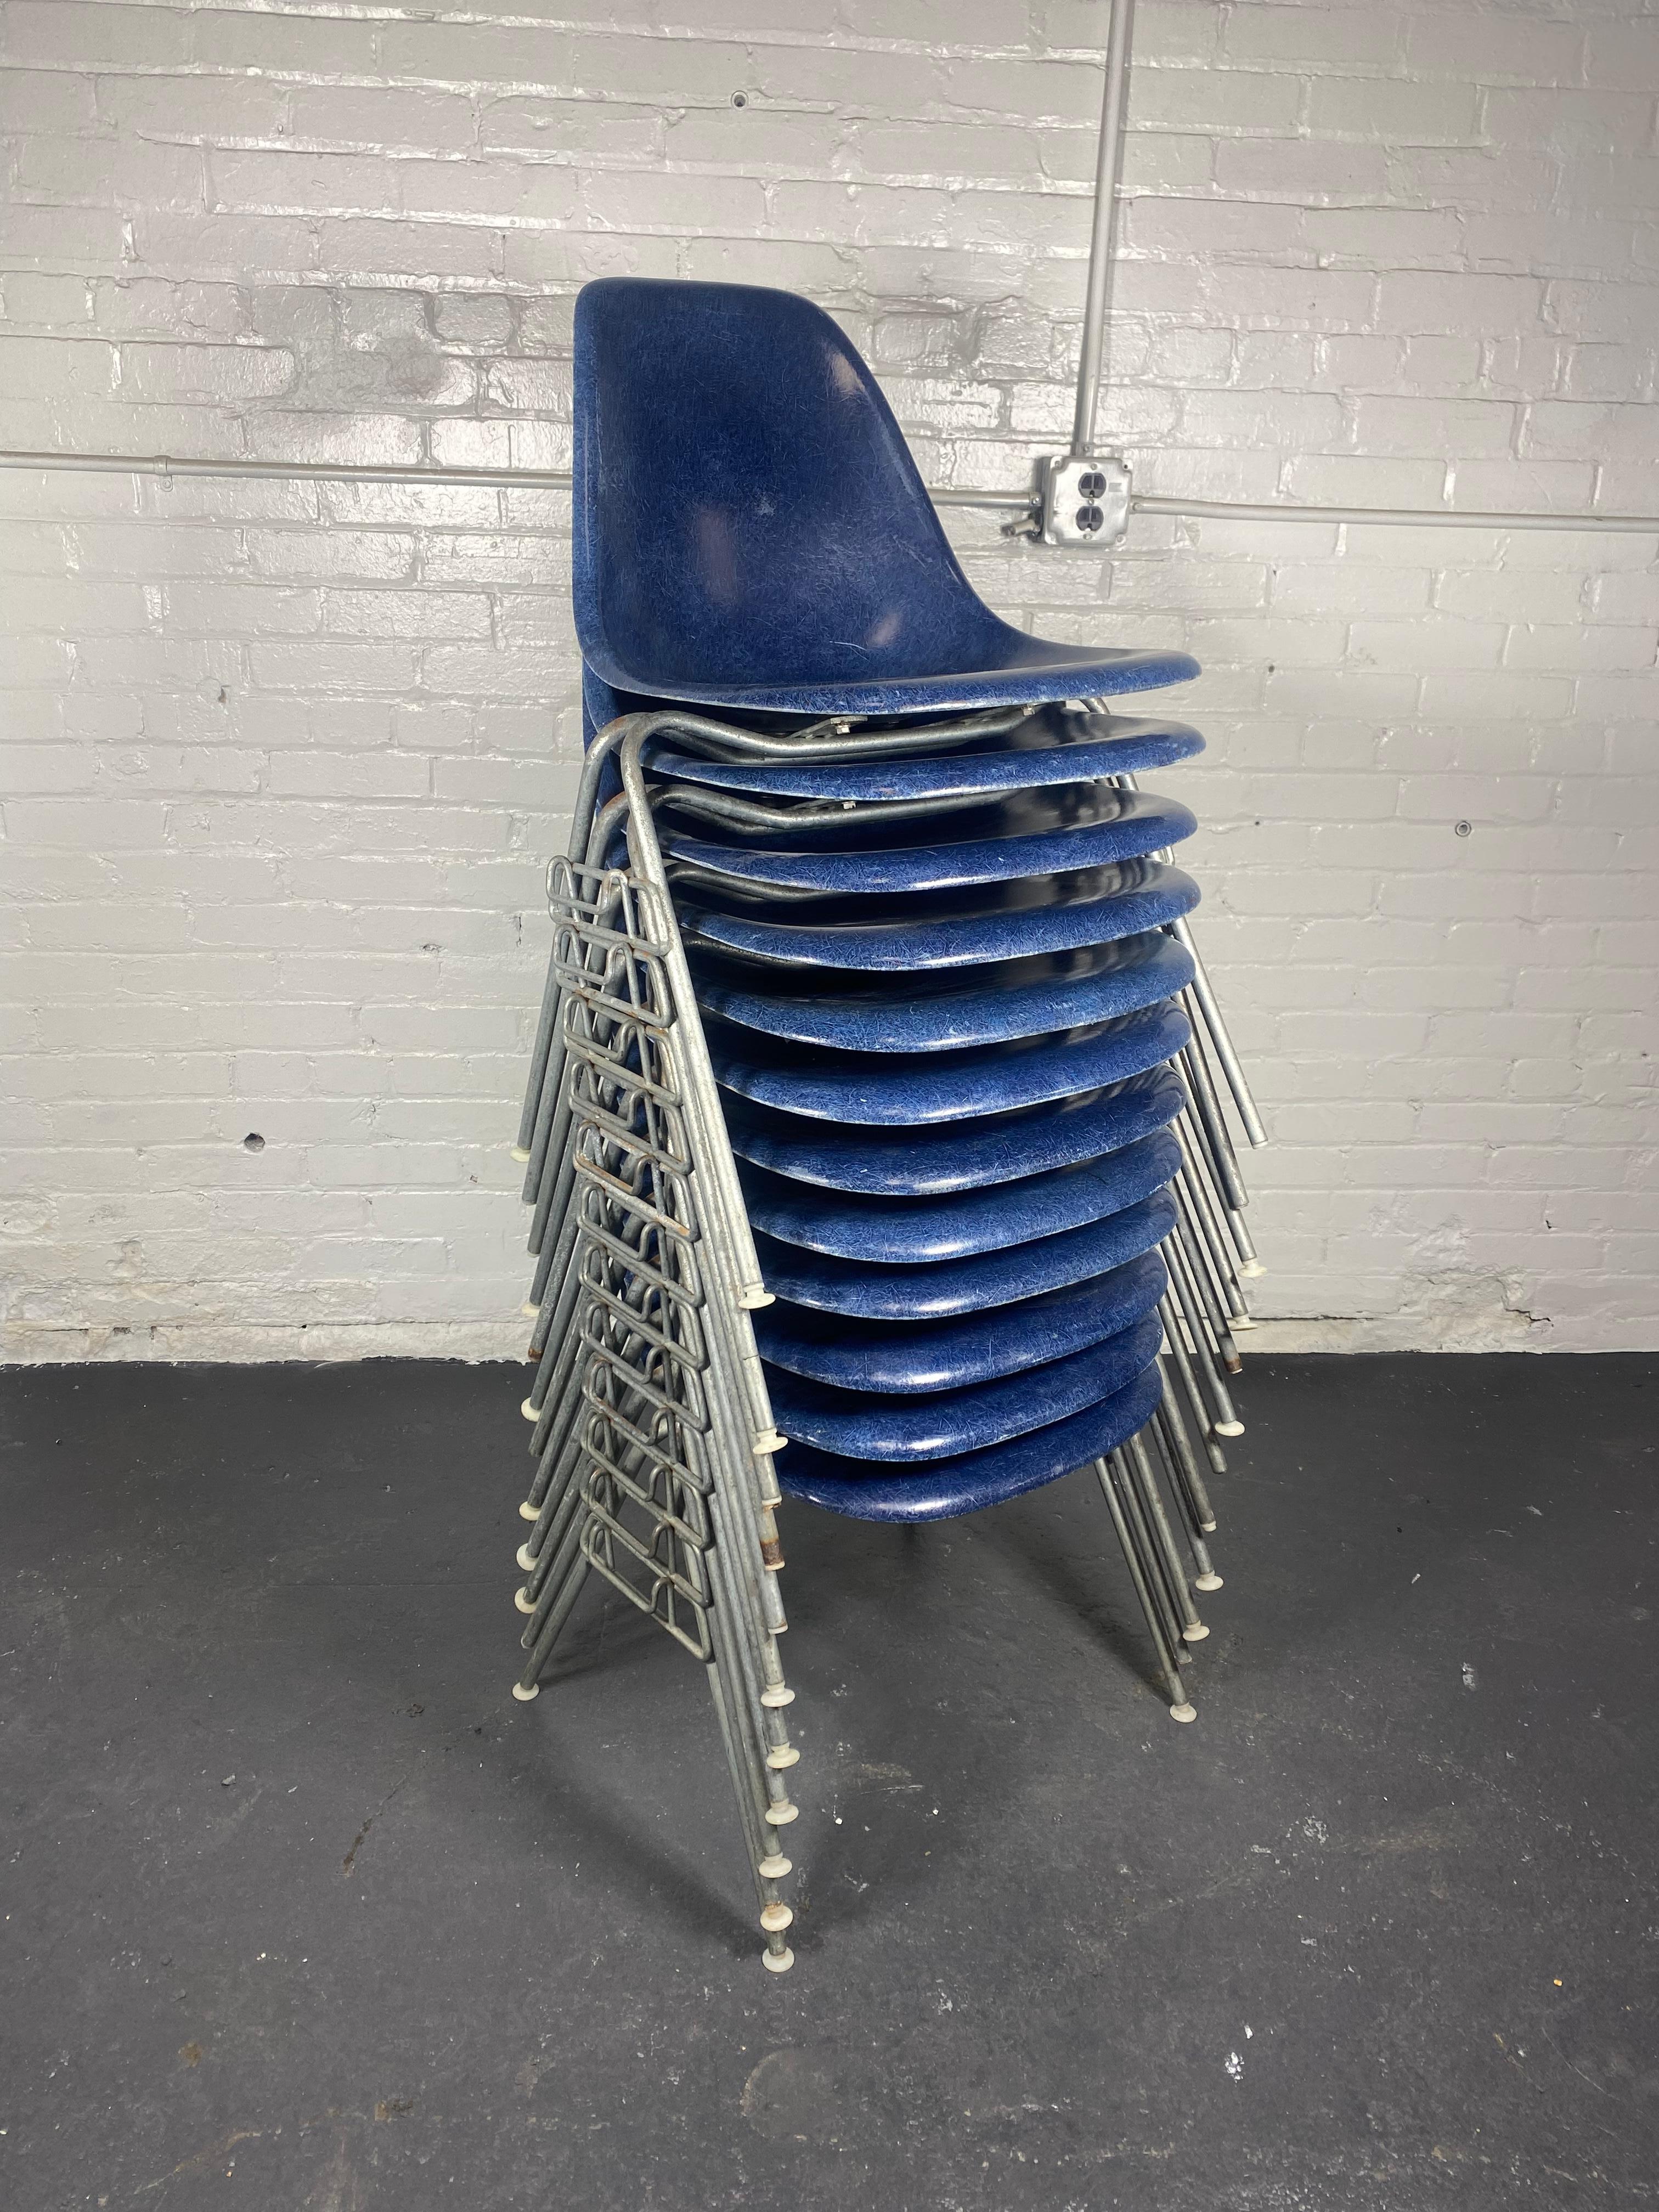 12 DSS Stacking Chairs Charles & Ray Eames Herman Miller, Blue Fiberglass, 1960s In Good Condition For Sale In Buffalo, NY